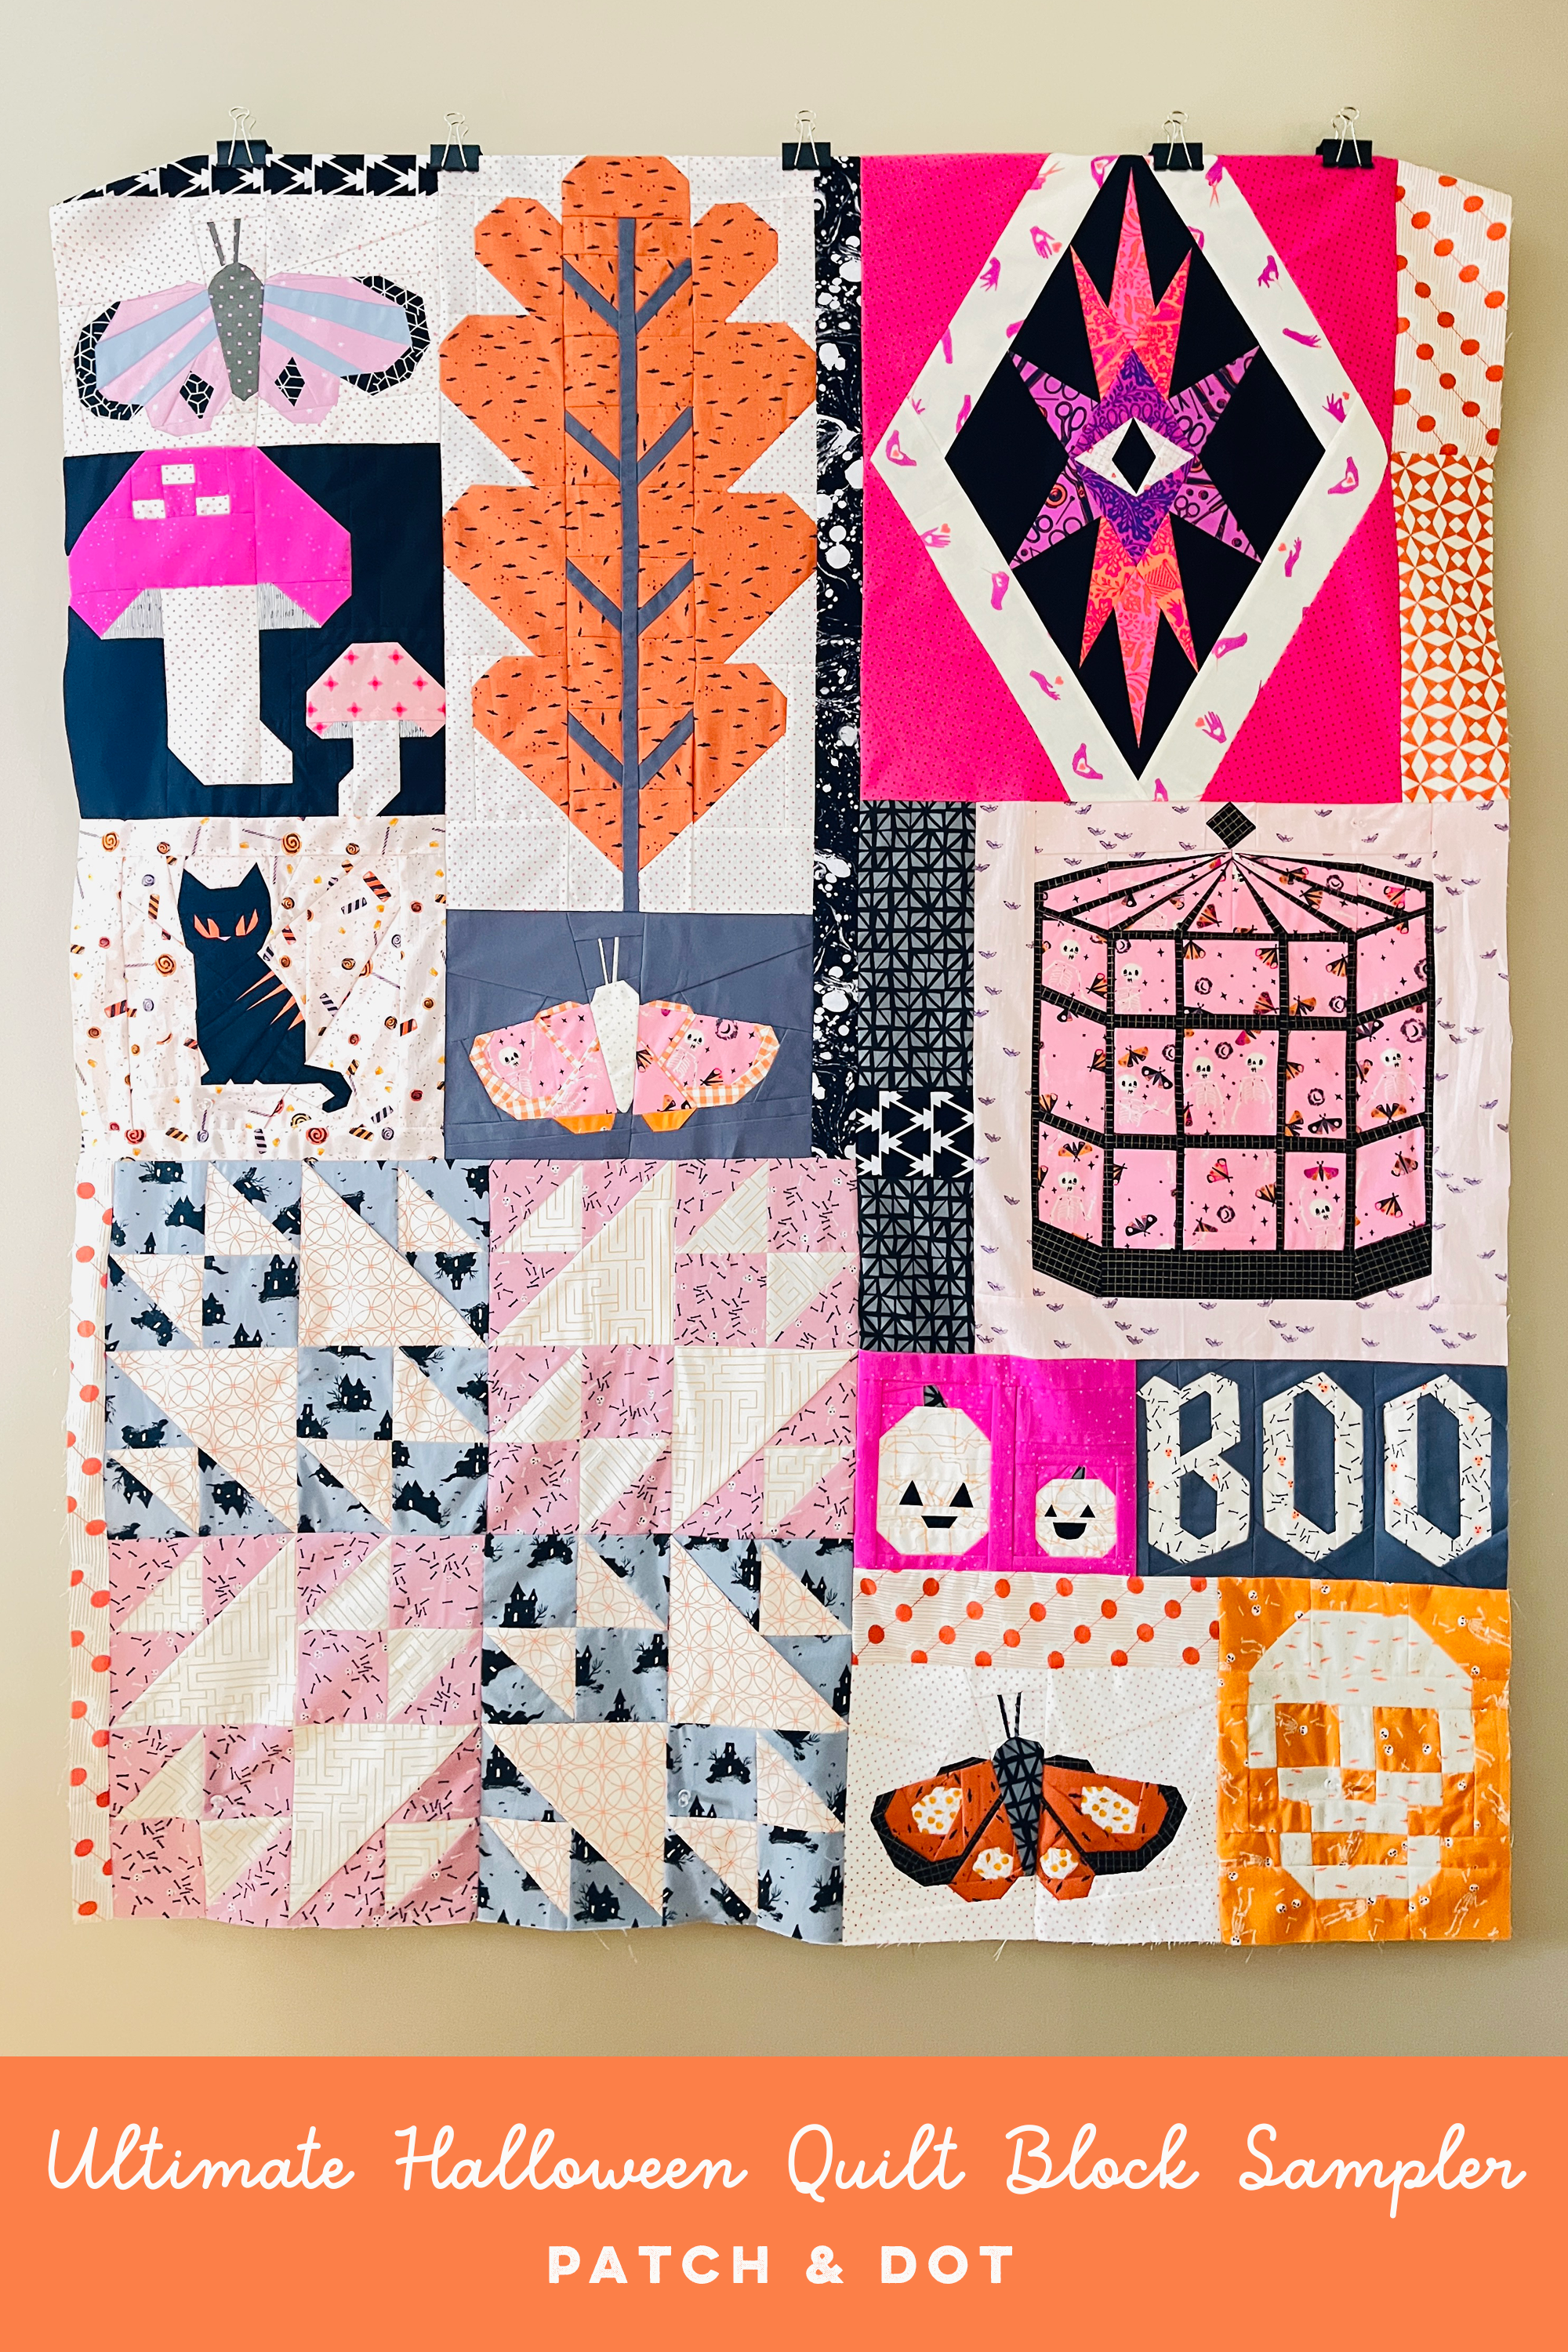 How to make a Halloween Quilt